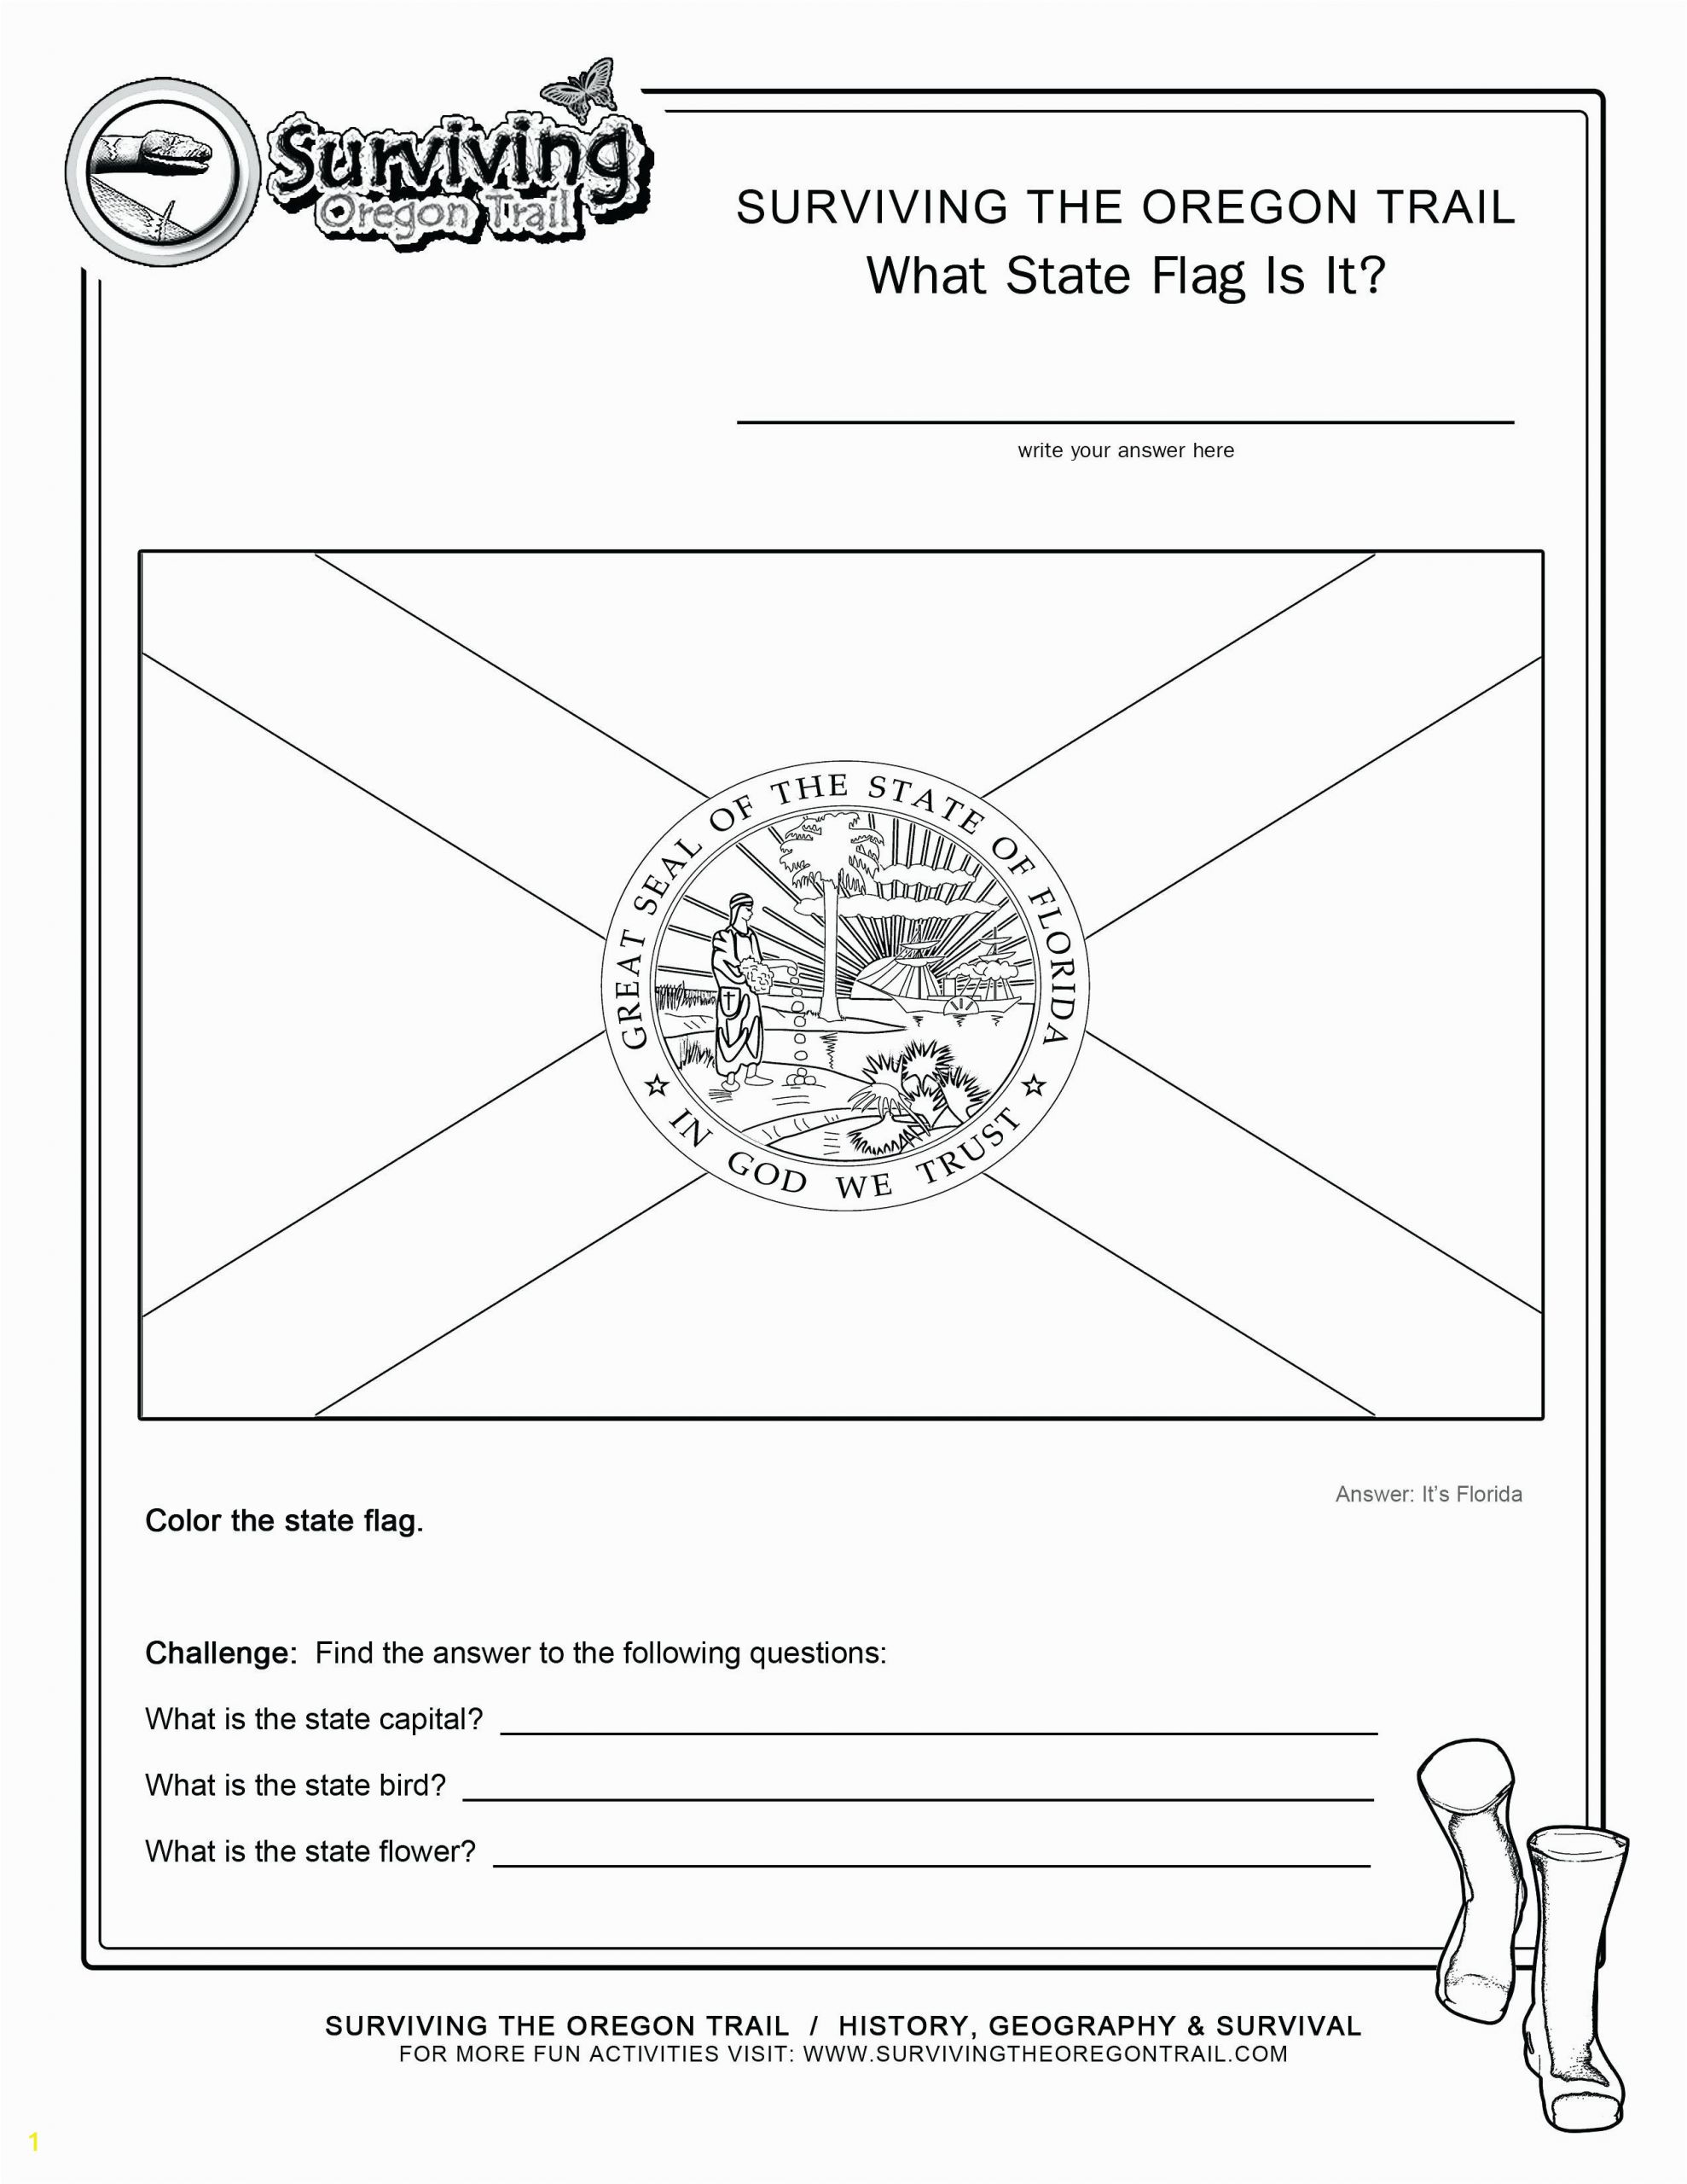 unique world flag coloring pages country sheets redhatsheet co